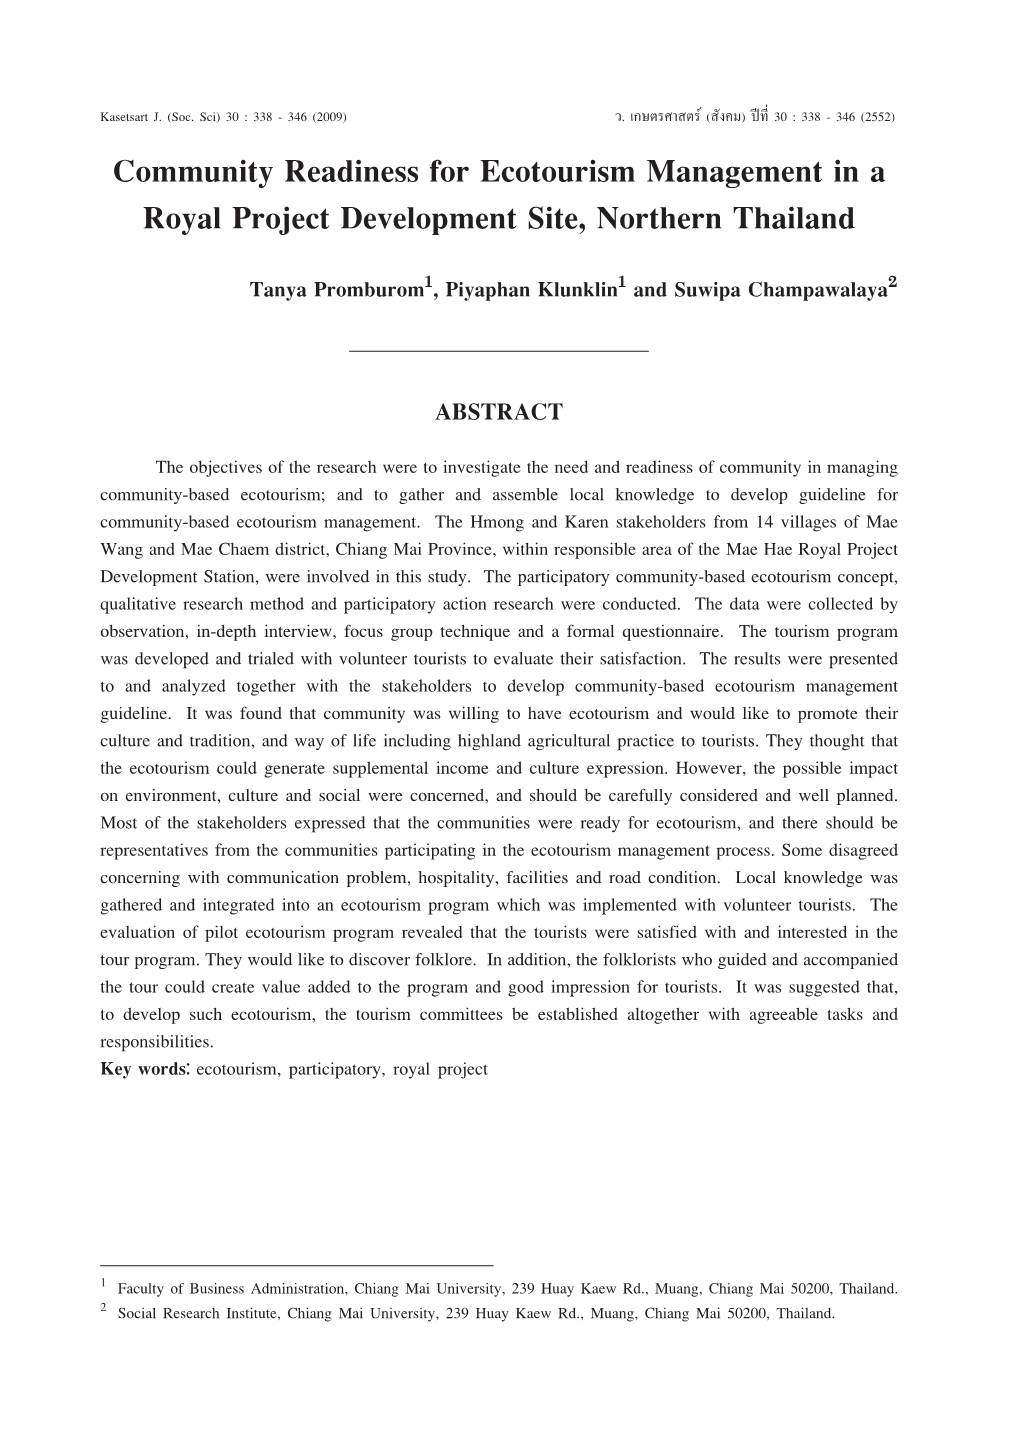 Community Readiness for Ecotourism Management in a Royal Project Development Site, Northern Thailand